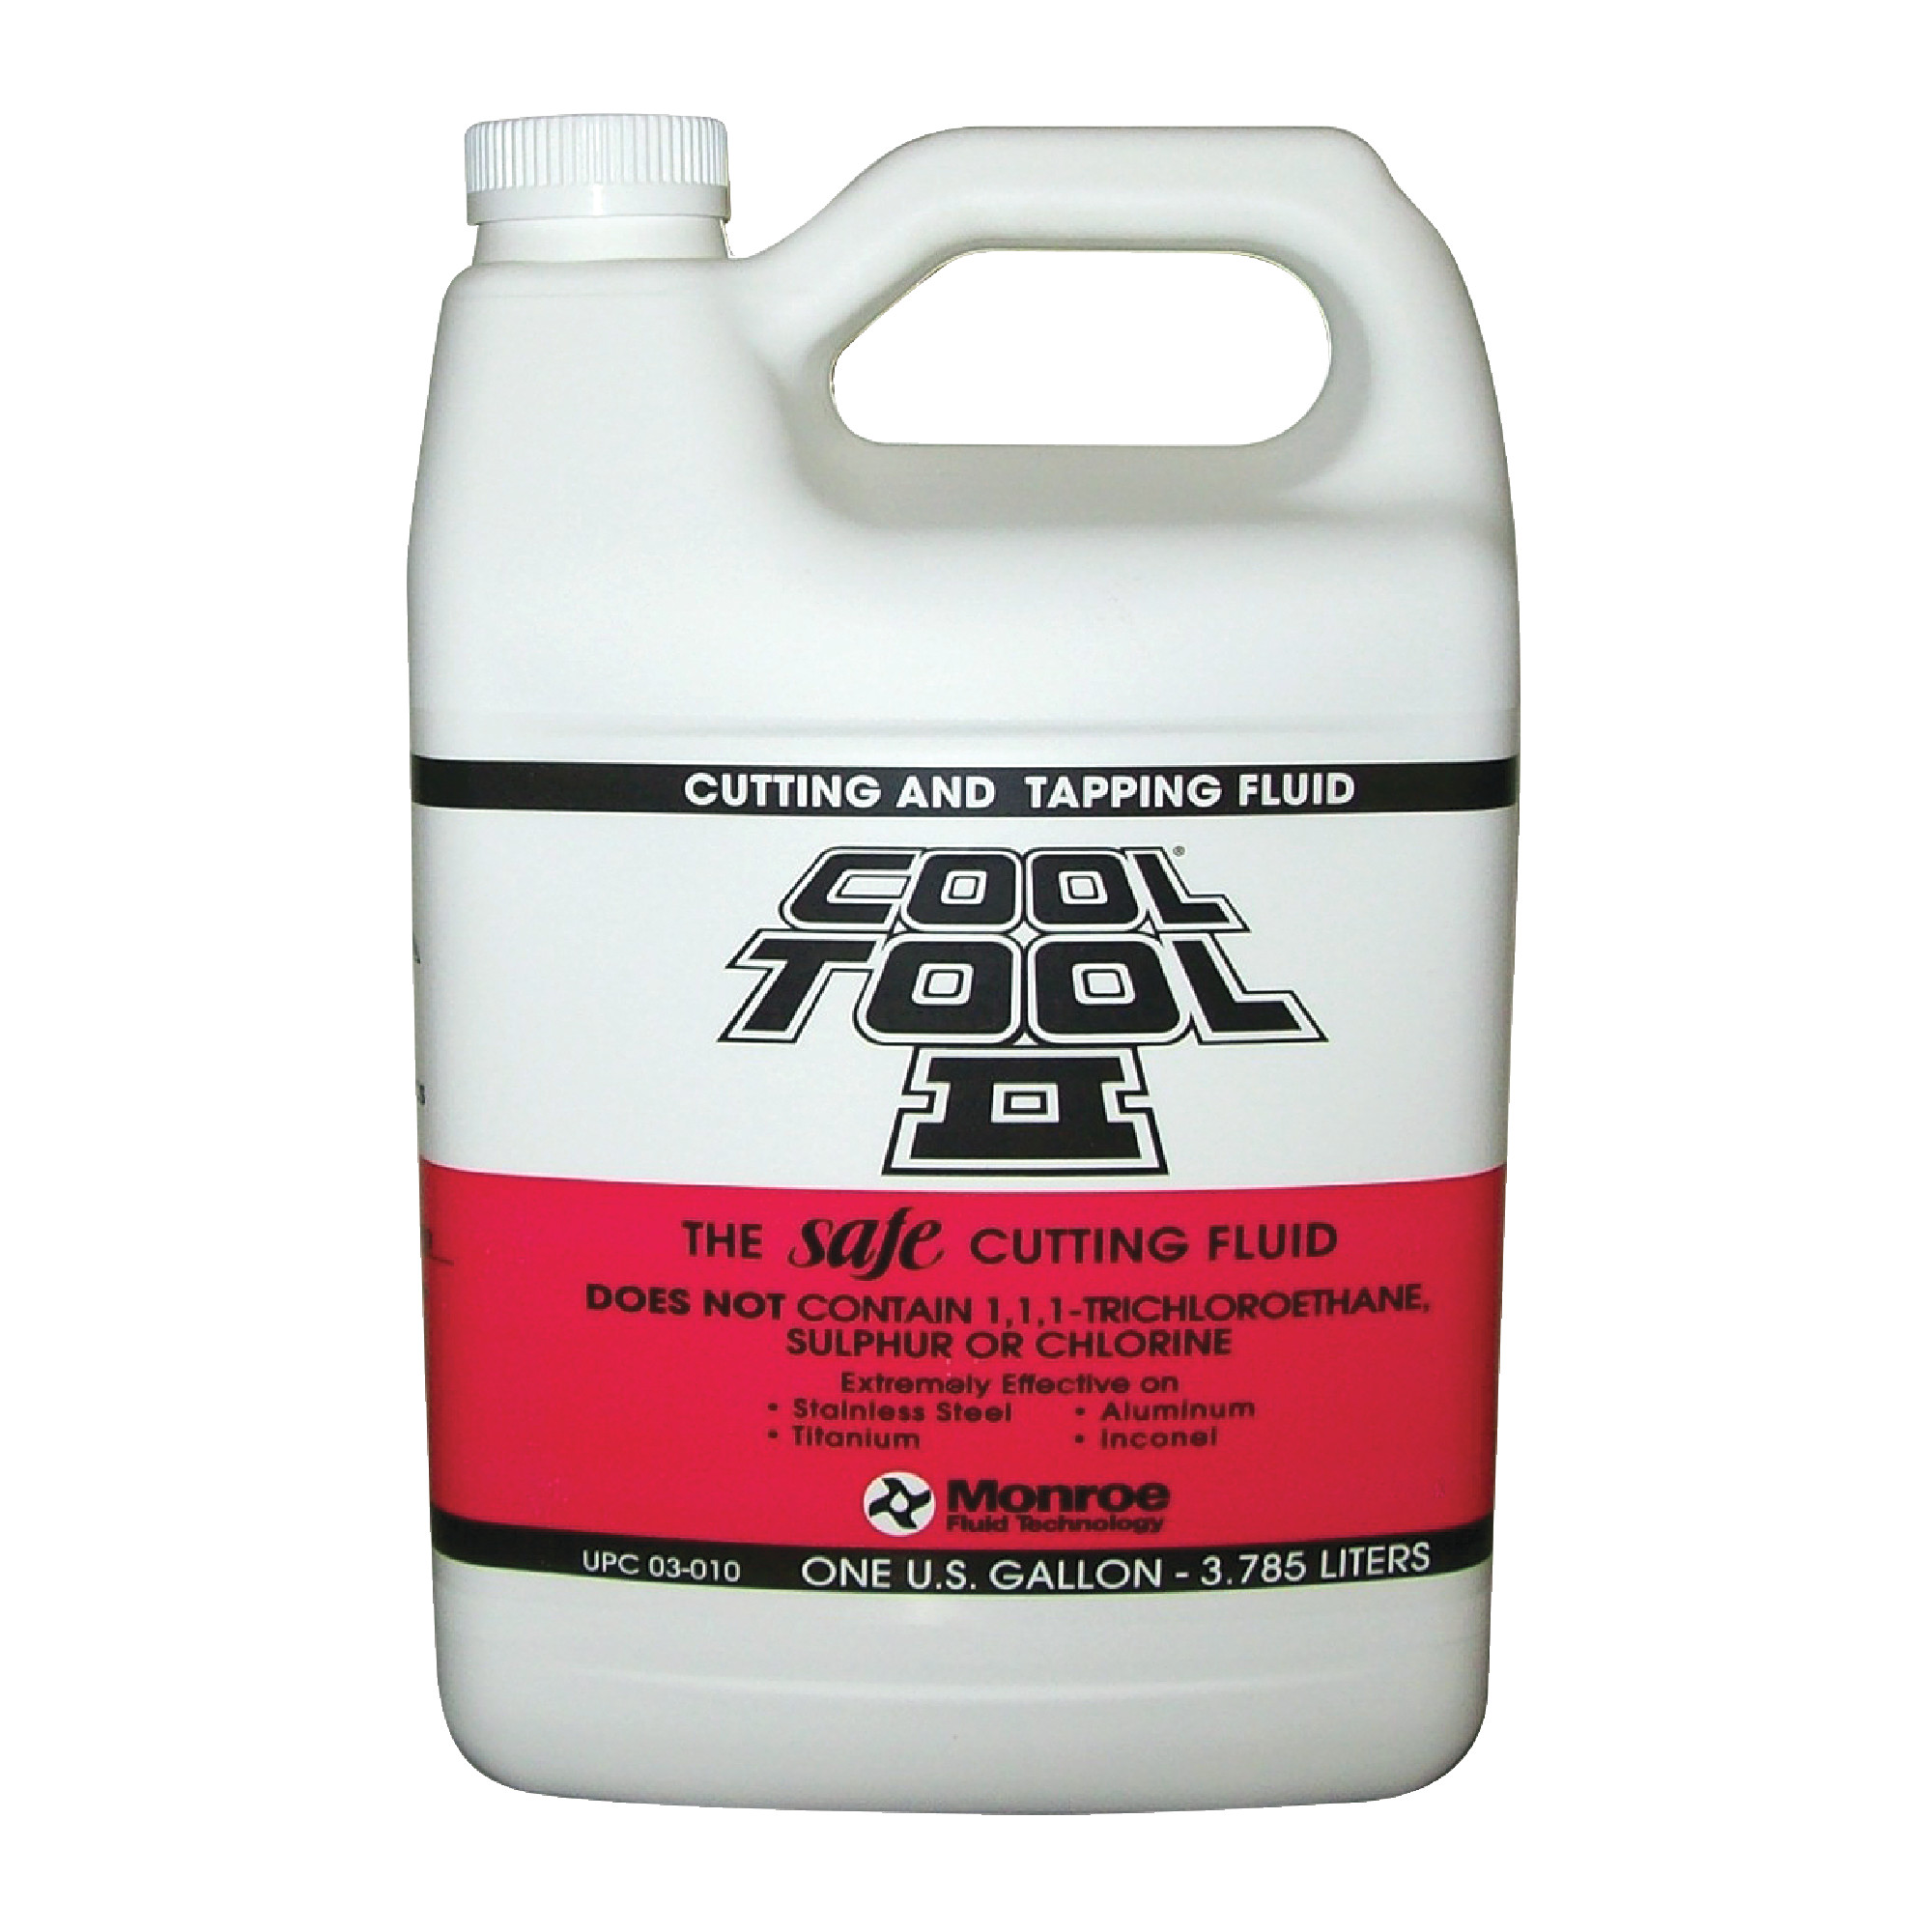 COOL TOOL&#174; Cutting & Tapping Fluids